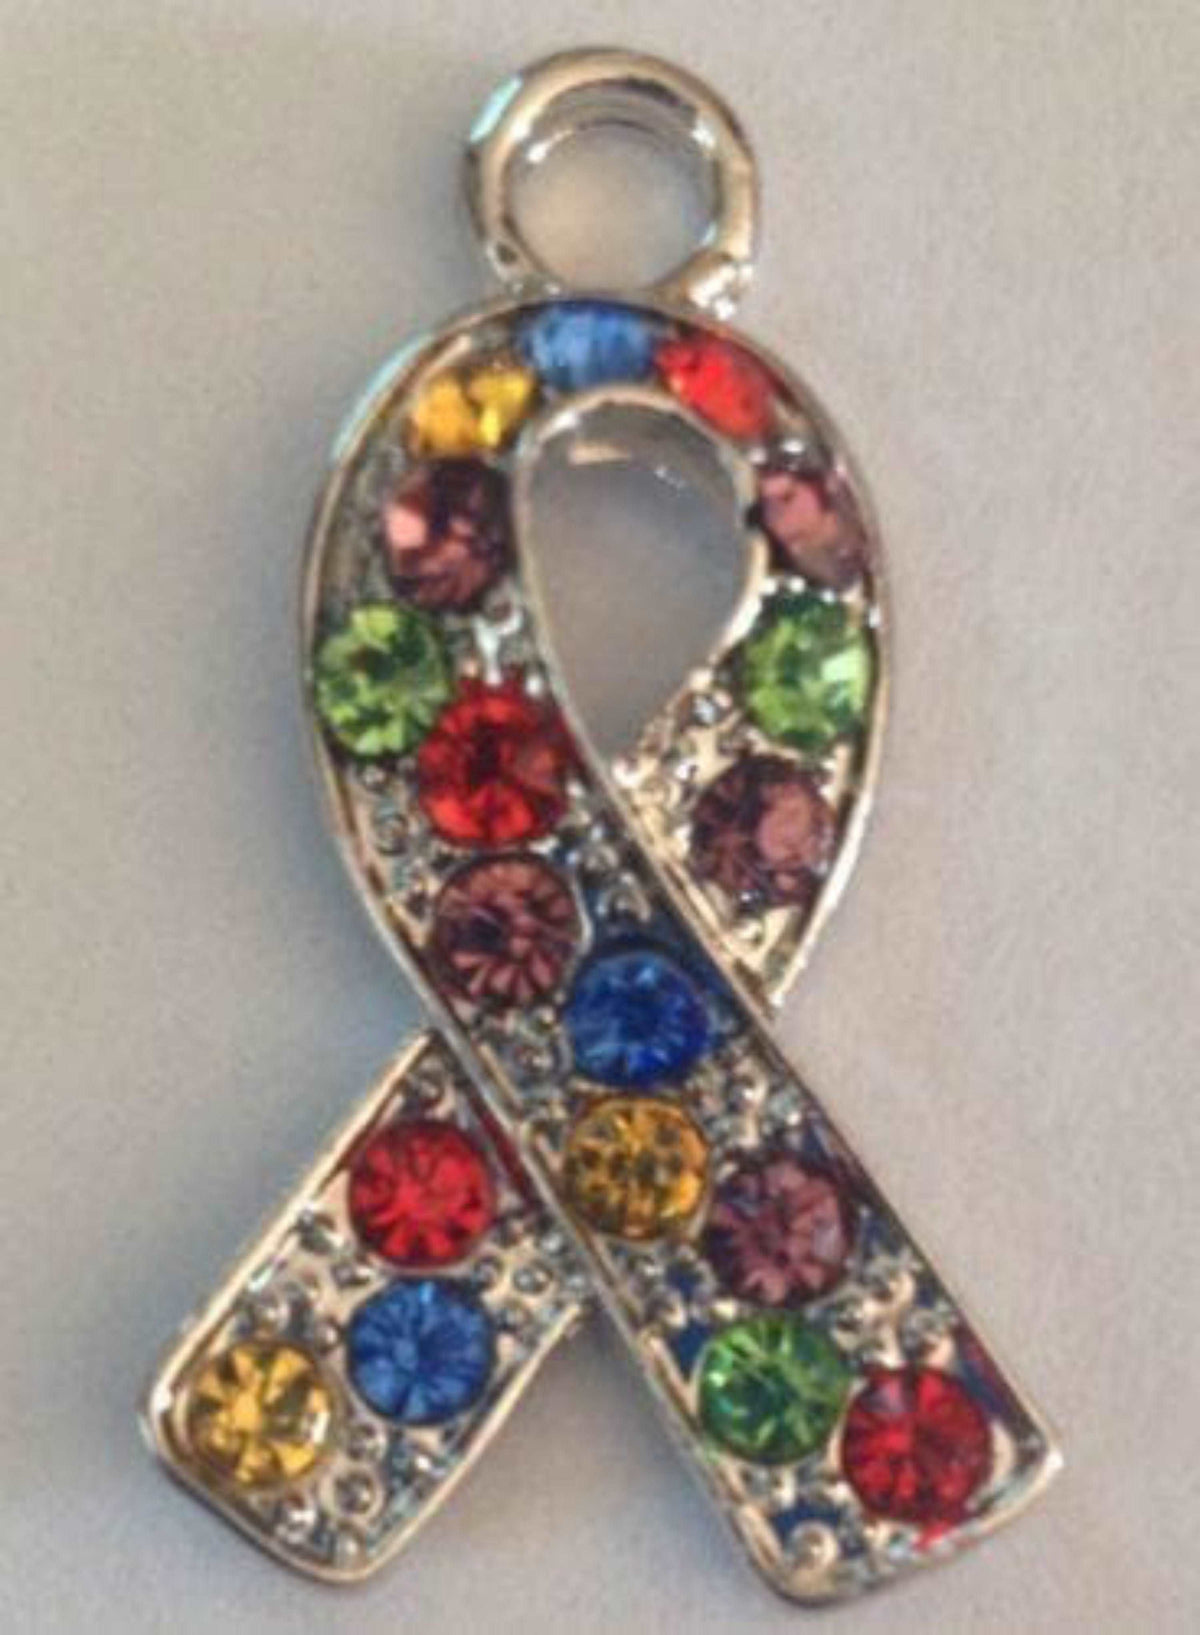 Autism Awareness Crystal Ribbon Pendant Necklace - The House of Awareness